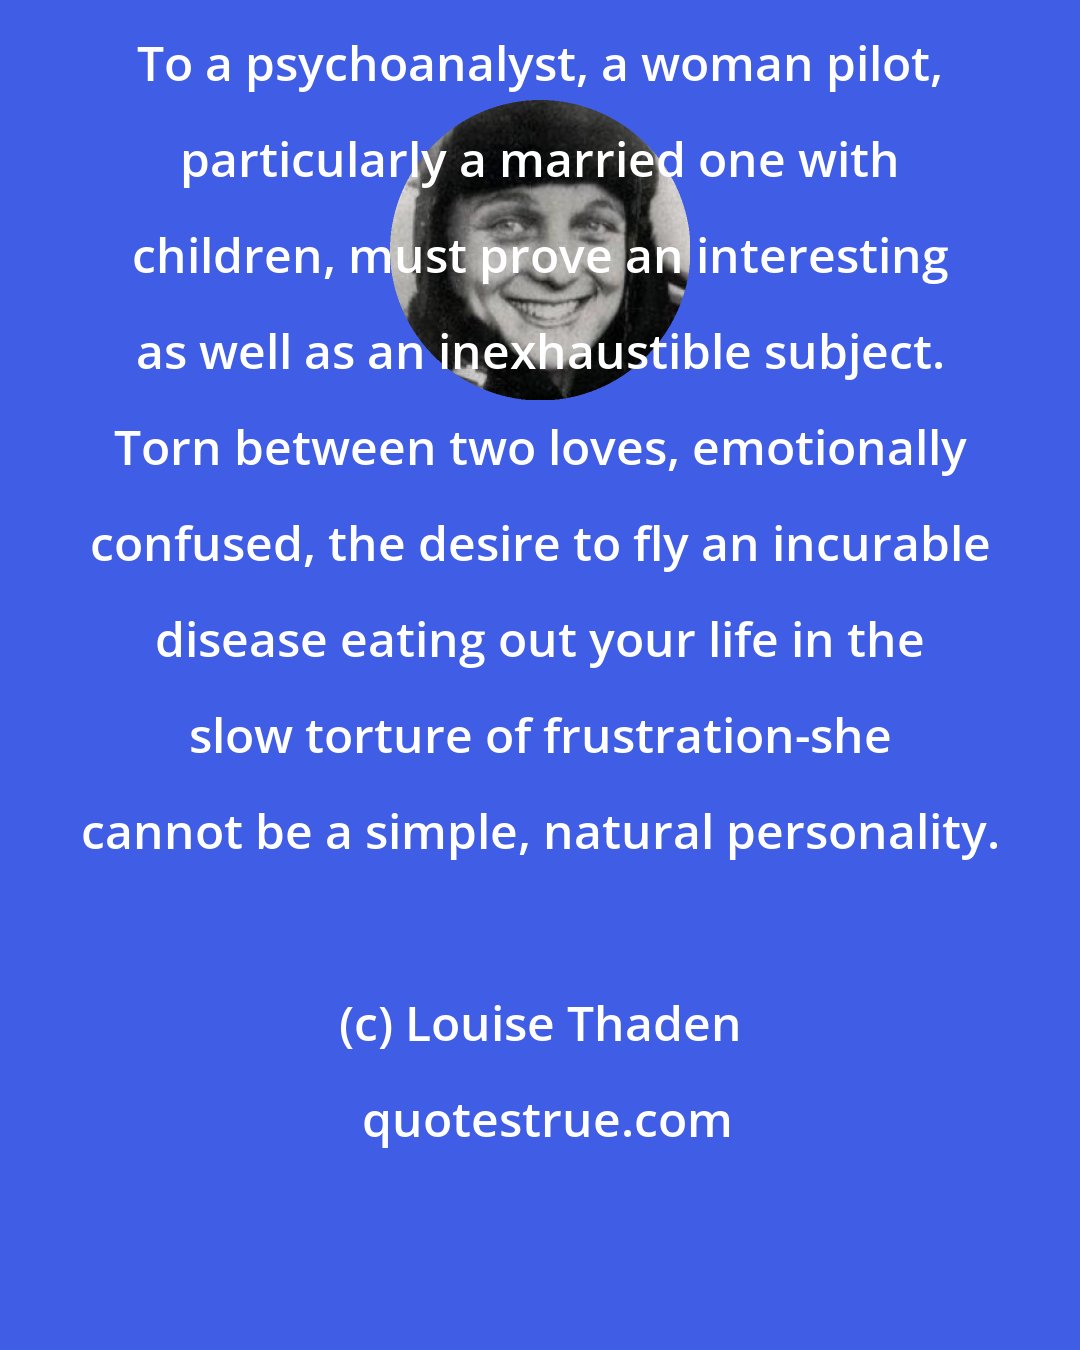 Louise Thaden: To a psychoanalyst, a woman pilot, particularly a married one with children, must prove an interesting as well as an inexhaustible subject. Torn between two loves, emotionally confused, the desire to fly an incurable disease eating out your life in the slow torture of frustration-she cannot be a simple, natural personality.